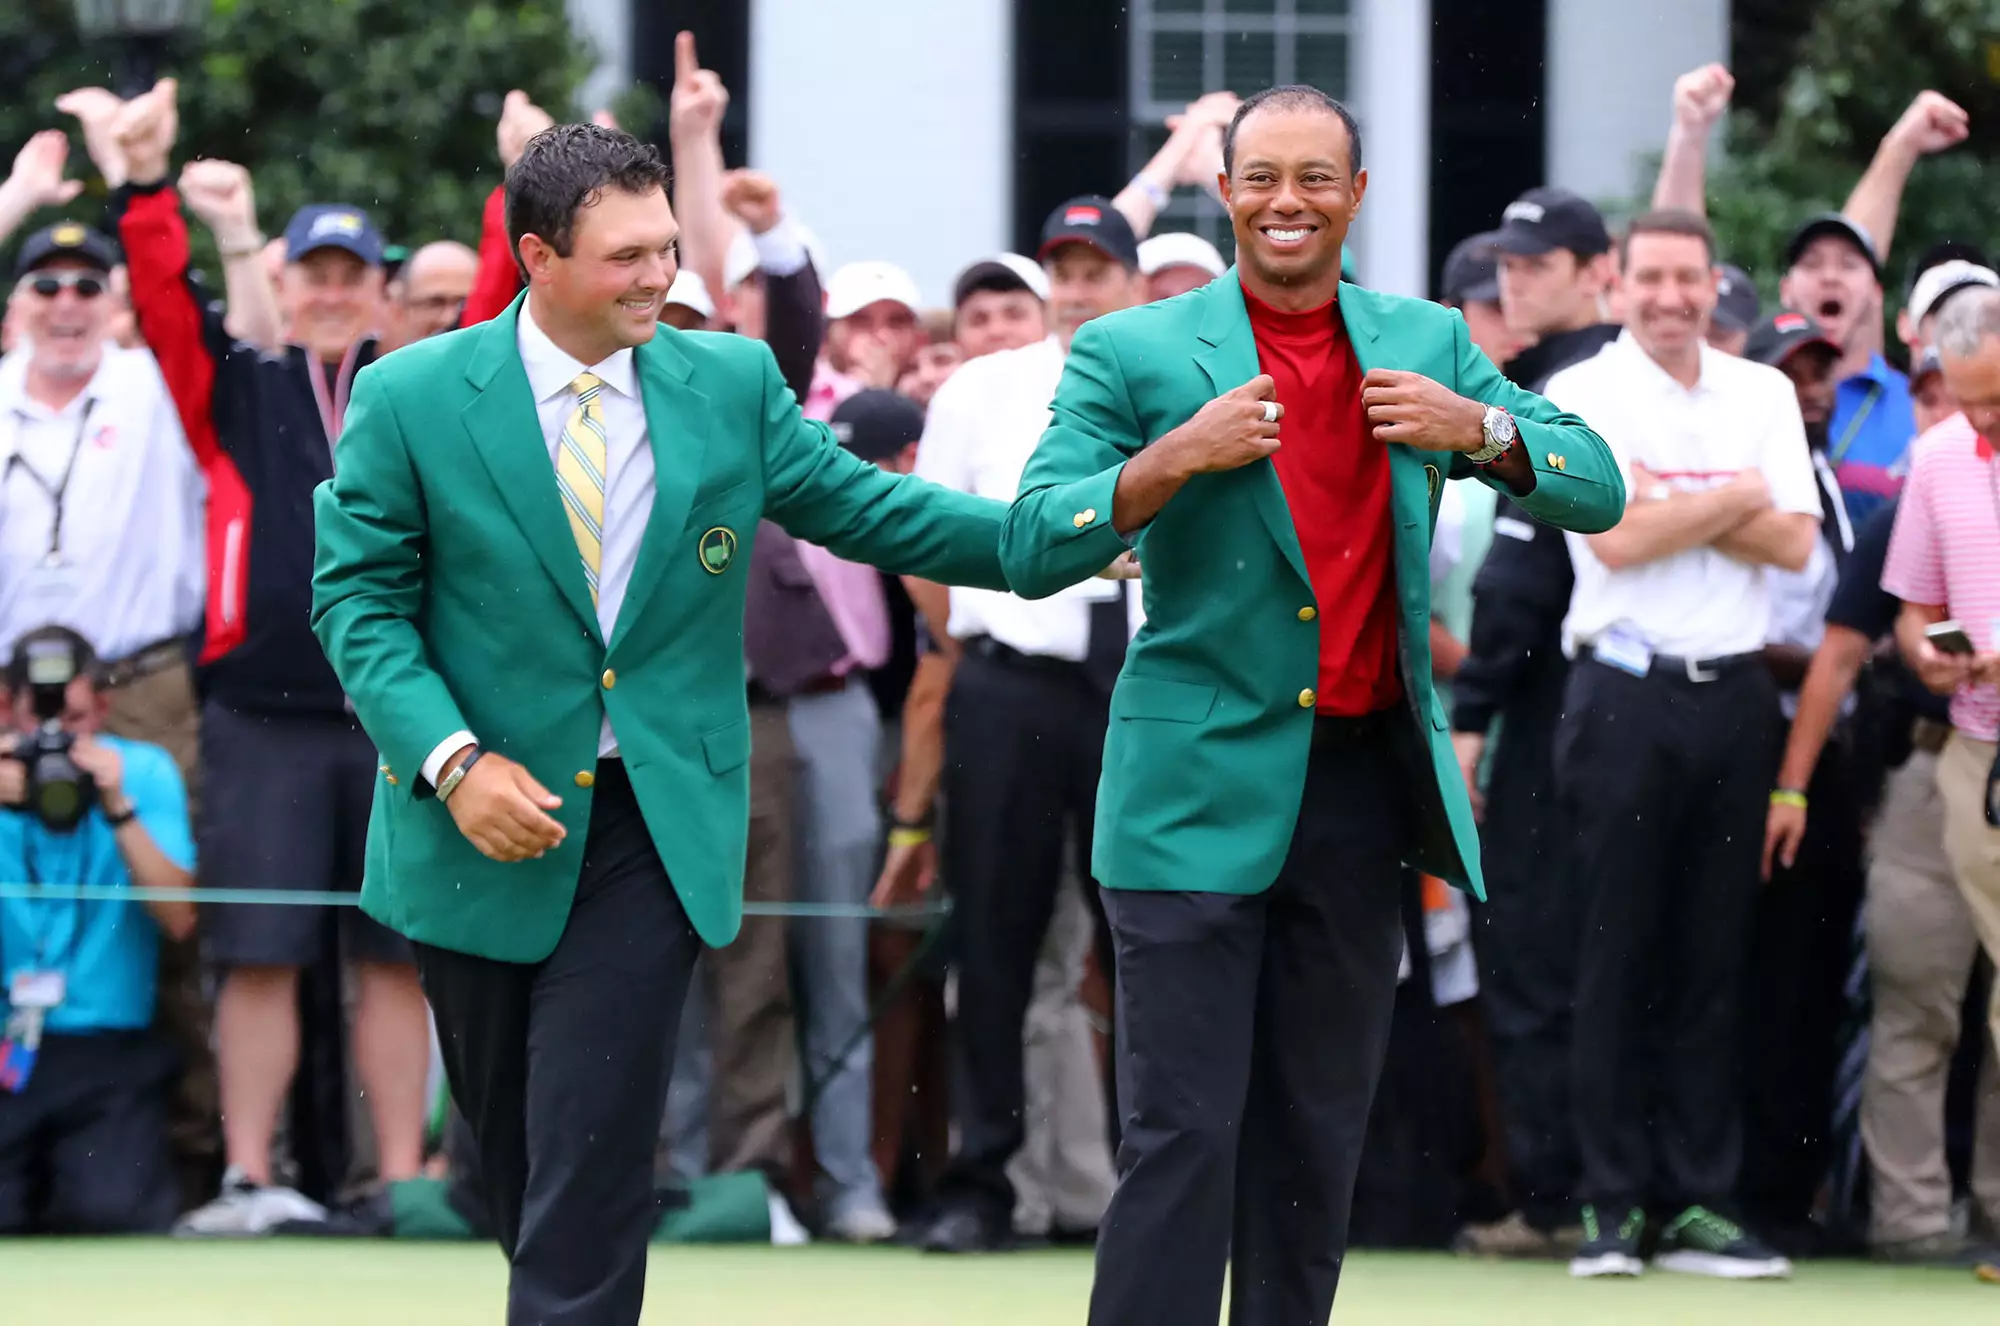 Tiger Woods secured his fifth green jacket... and $1.2 million for a mystery punter.